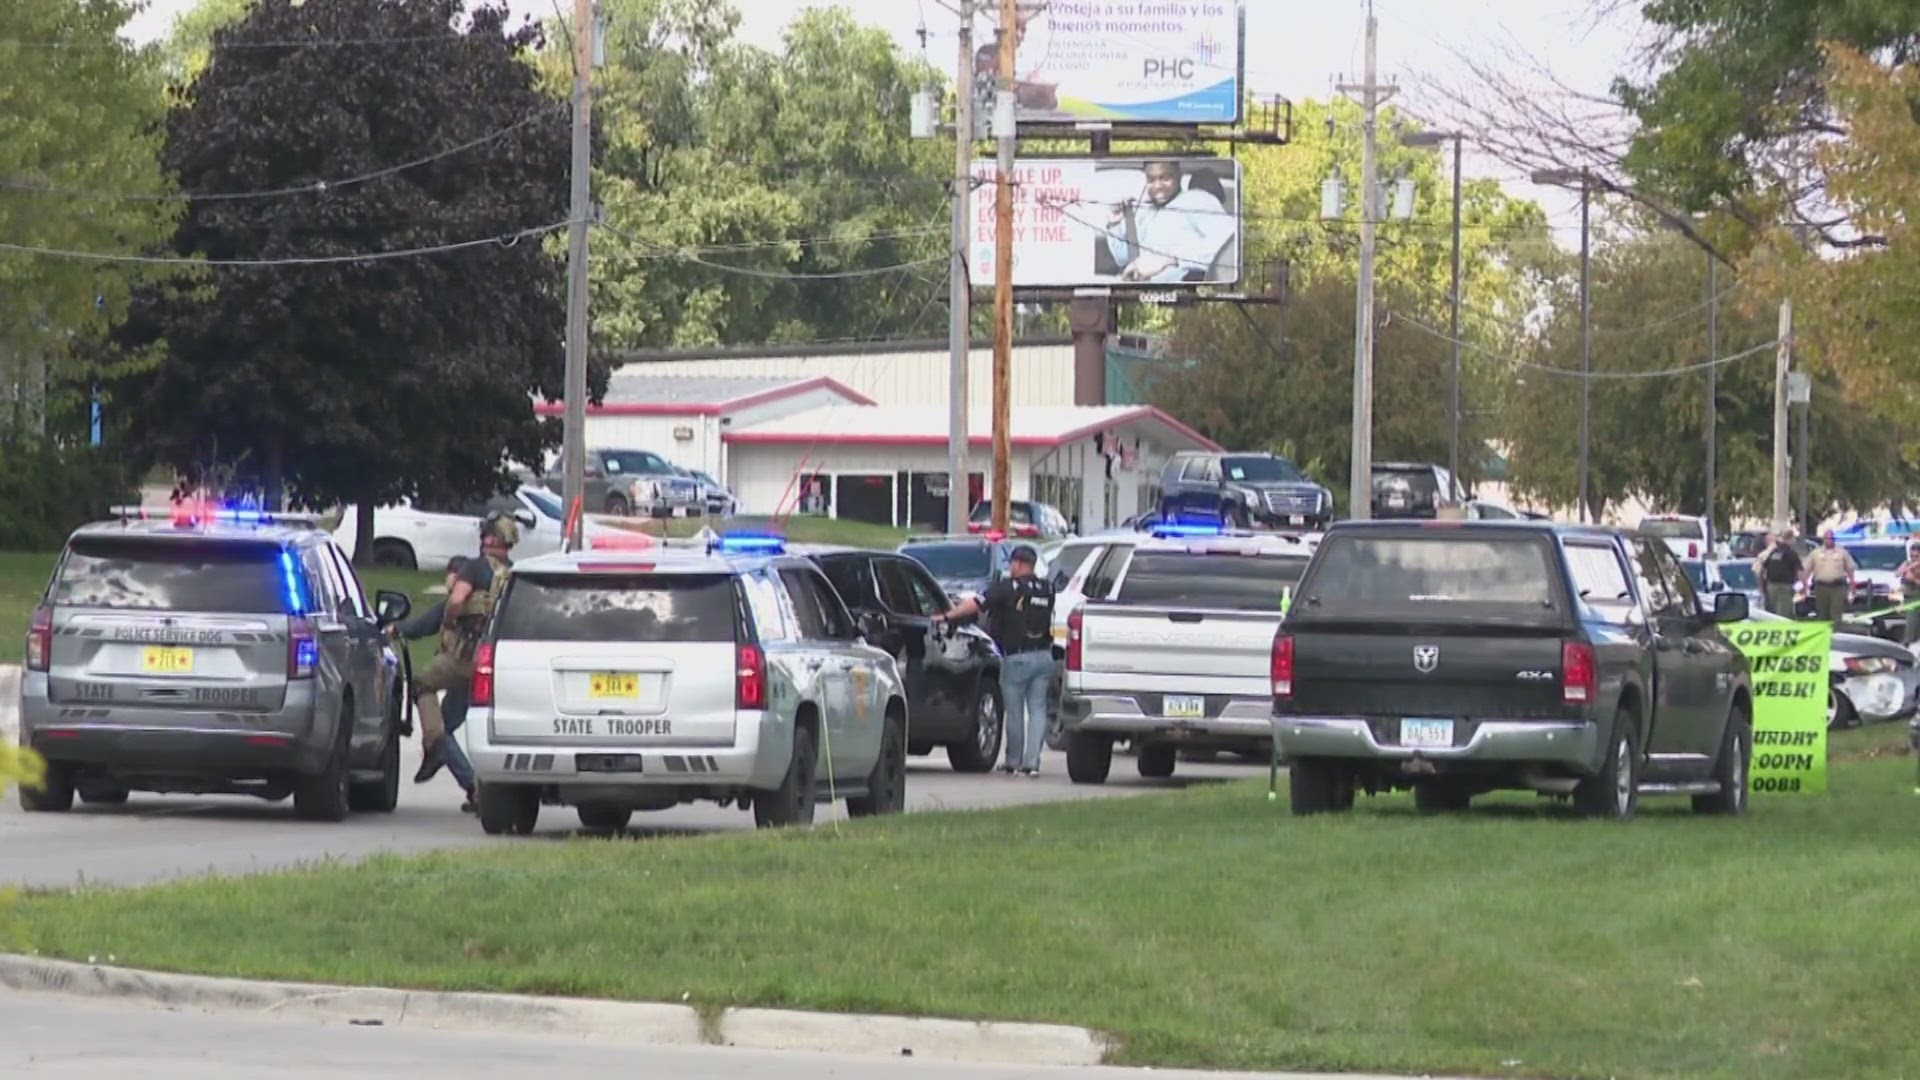 Officials identified 42-year-old Scott Eugene Smith of Des Moines as the suspect who shot at a deputy and barricaded himself inside a hotel.